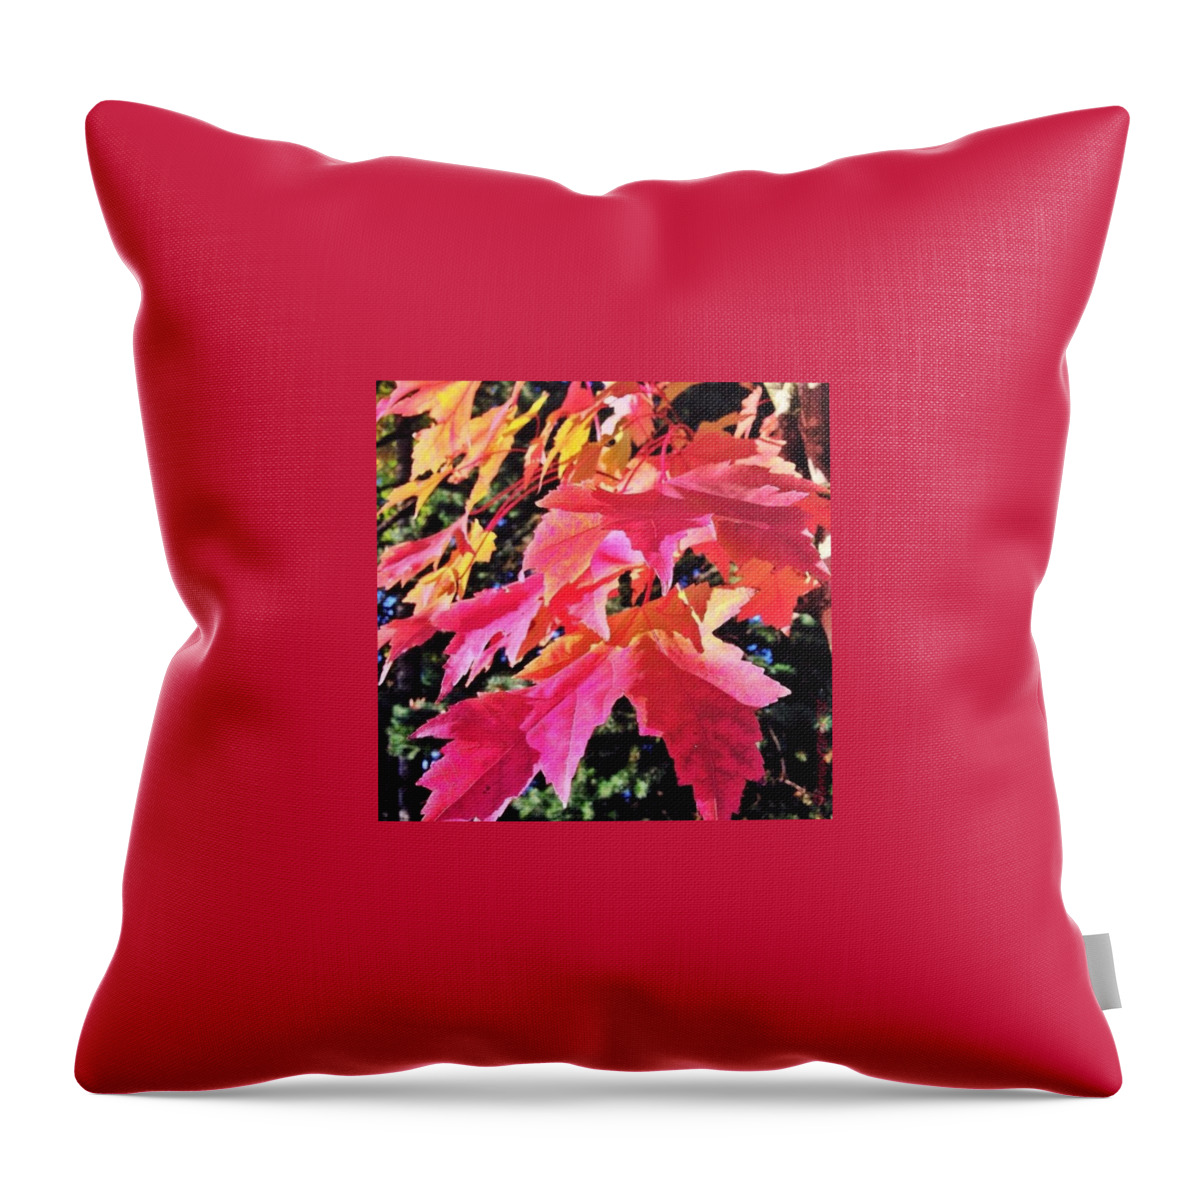 Red Throw Pillow featuring the photograph Changing Seasons Red Maple Leaves by Anna Porter